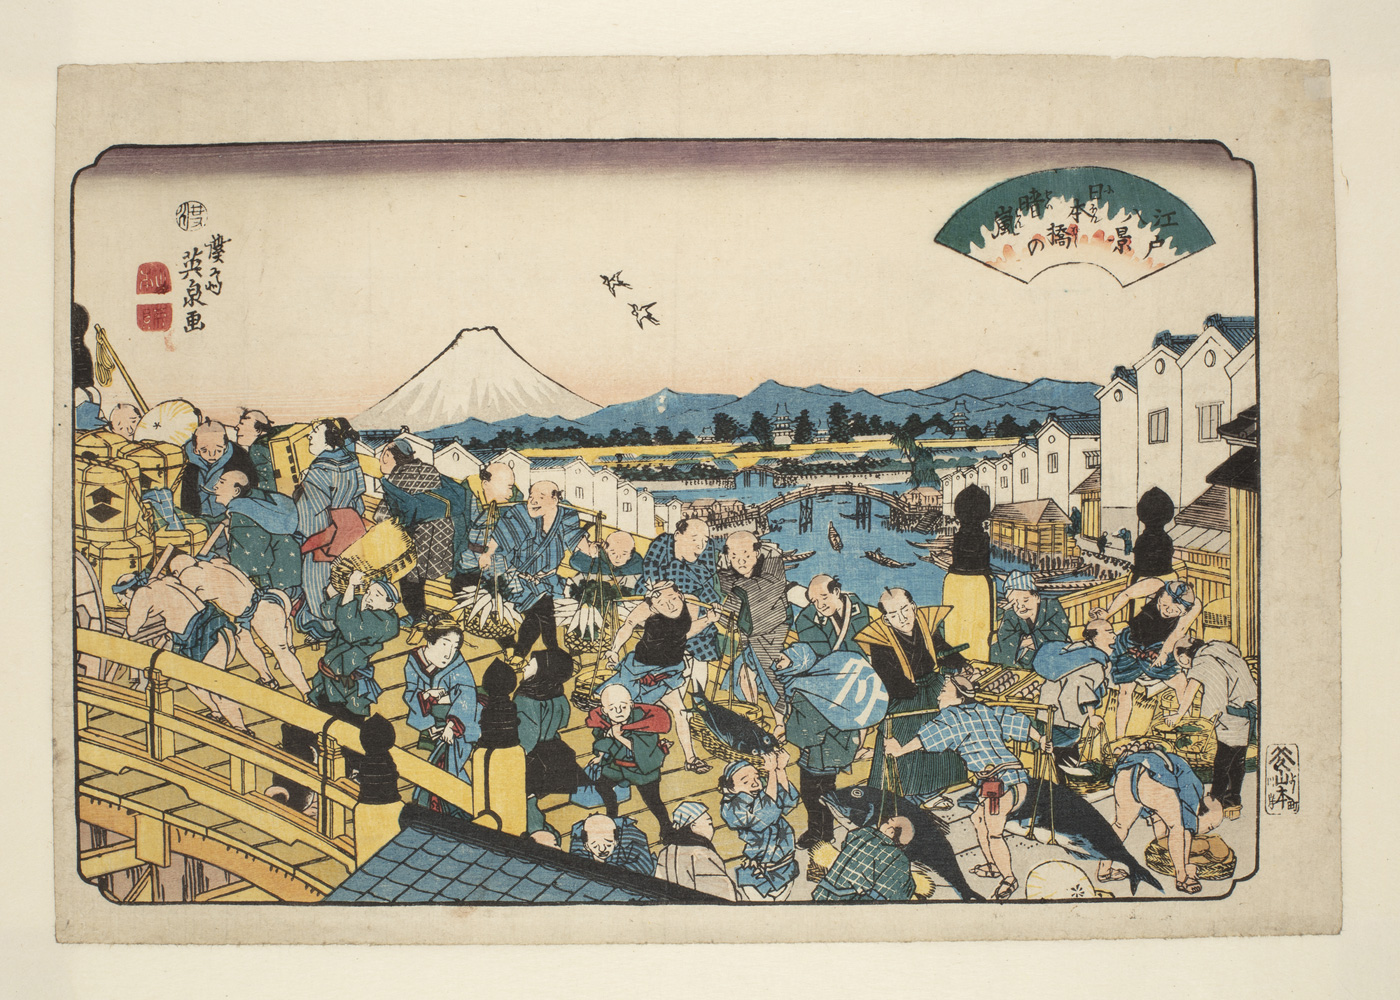 Japanese print of scene of a chaotic bridge crossing. People dressed in traditional robes, some men in loin cloths and women in kimonos. Fishermen carrying baskets of fish, others push hand carts. In the distance we see the river, buildings, mountains and Mount Fuji.